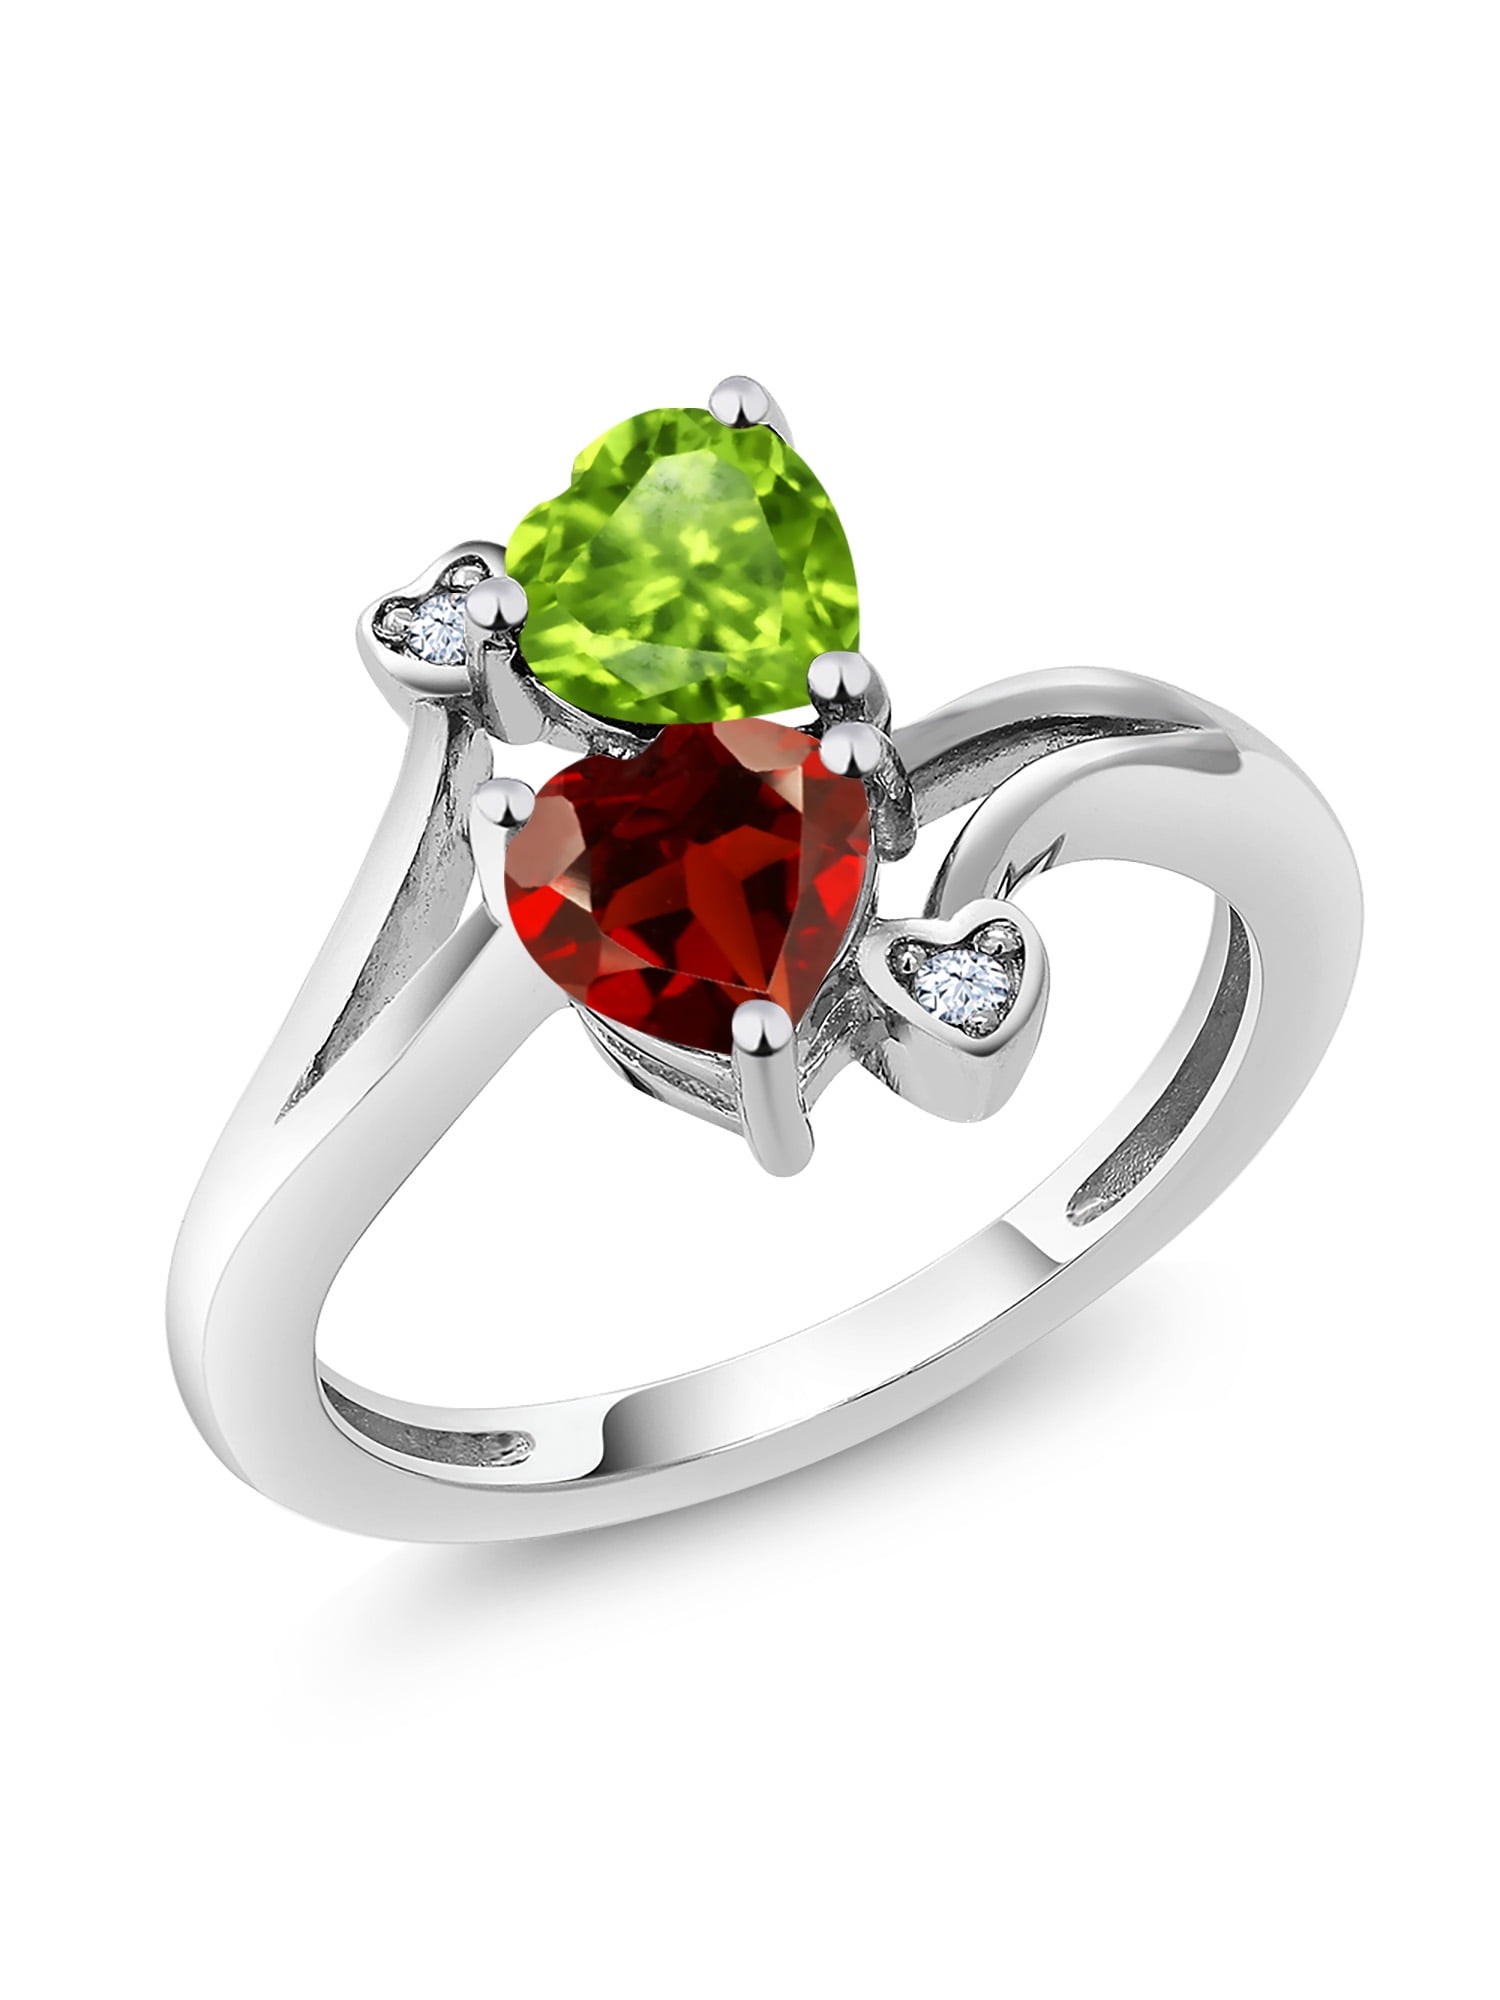 6.70 Carat Peridot, Sapphire, and Rhodolite Garnet Yellow Gold Cocktail Ring  For Sale at 1stDibs | peridot sapphire ring, garuda garnet, garnet x peridot